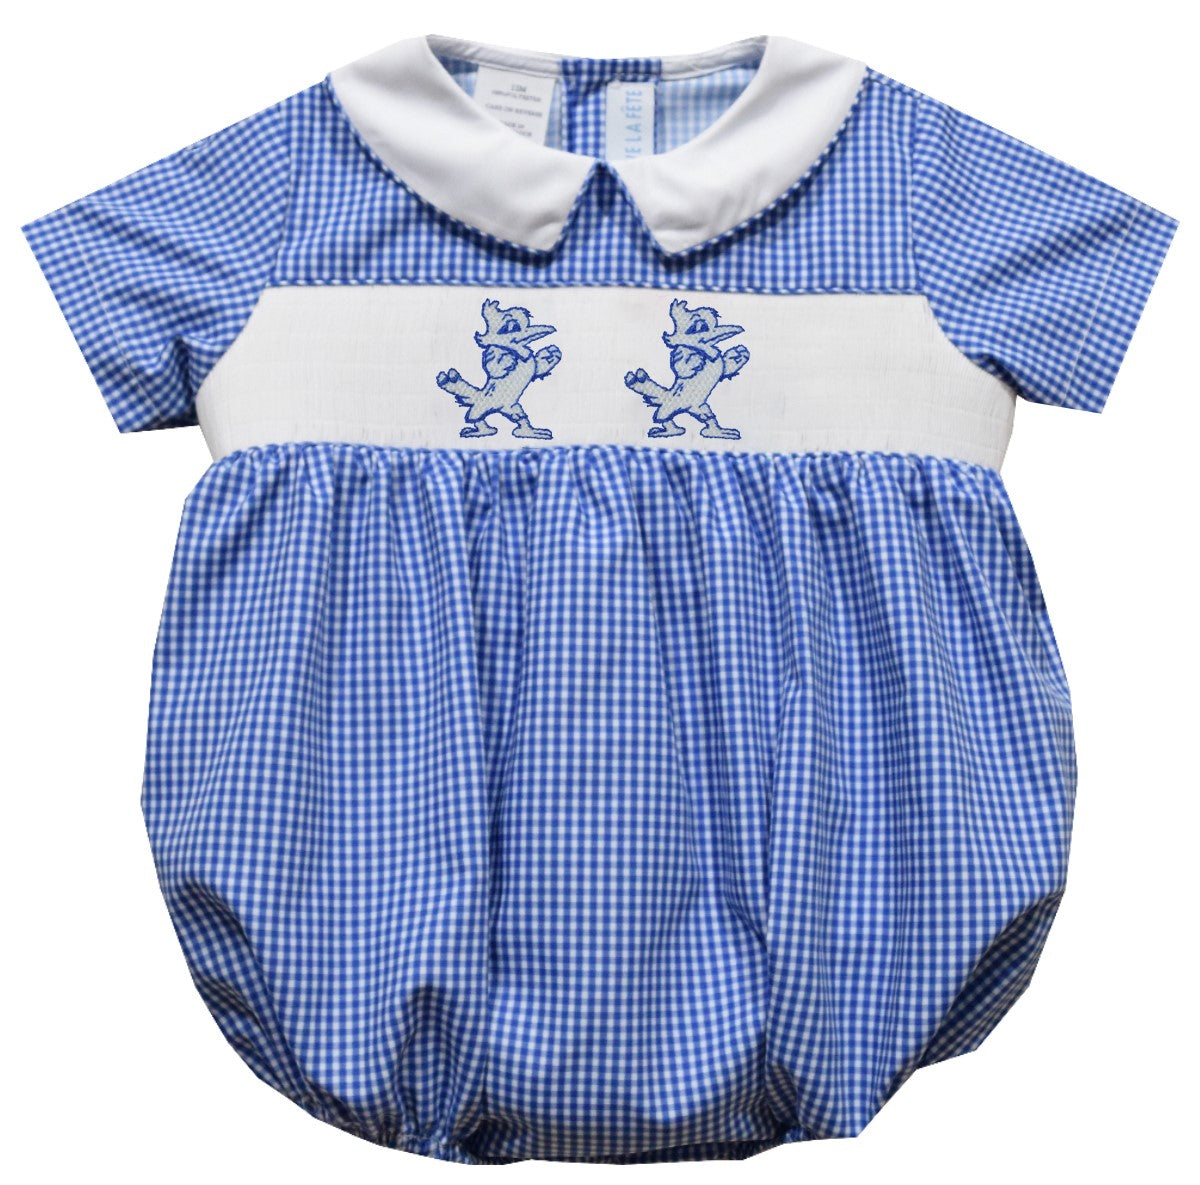 Vive La Fete.  55% Polyester/45% Cotton.  Machine Wash.  Smocked Jayson Logo.  This infant's classic smocked bubble will show off his Blue Jay Spirit!